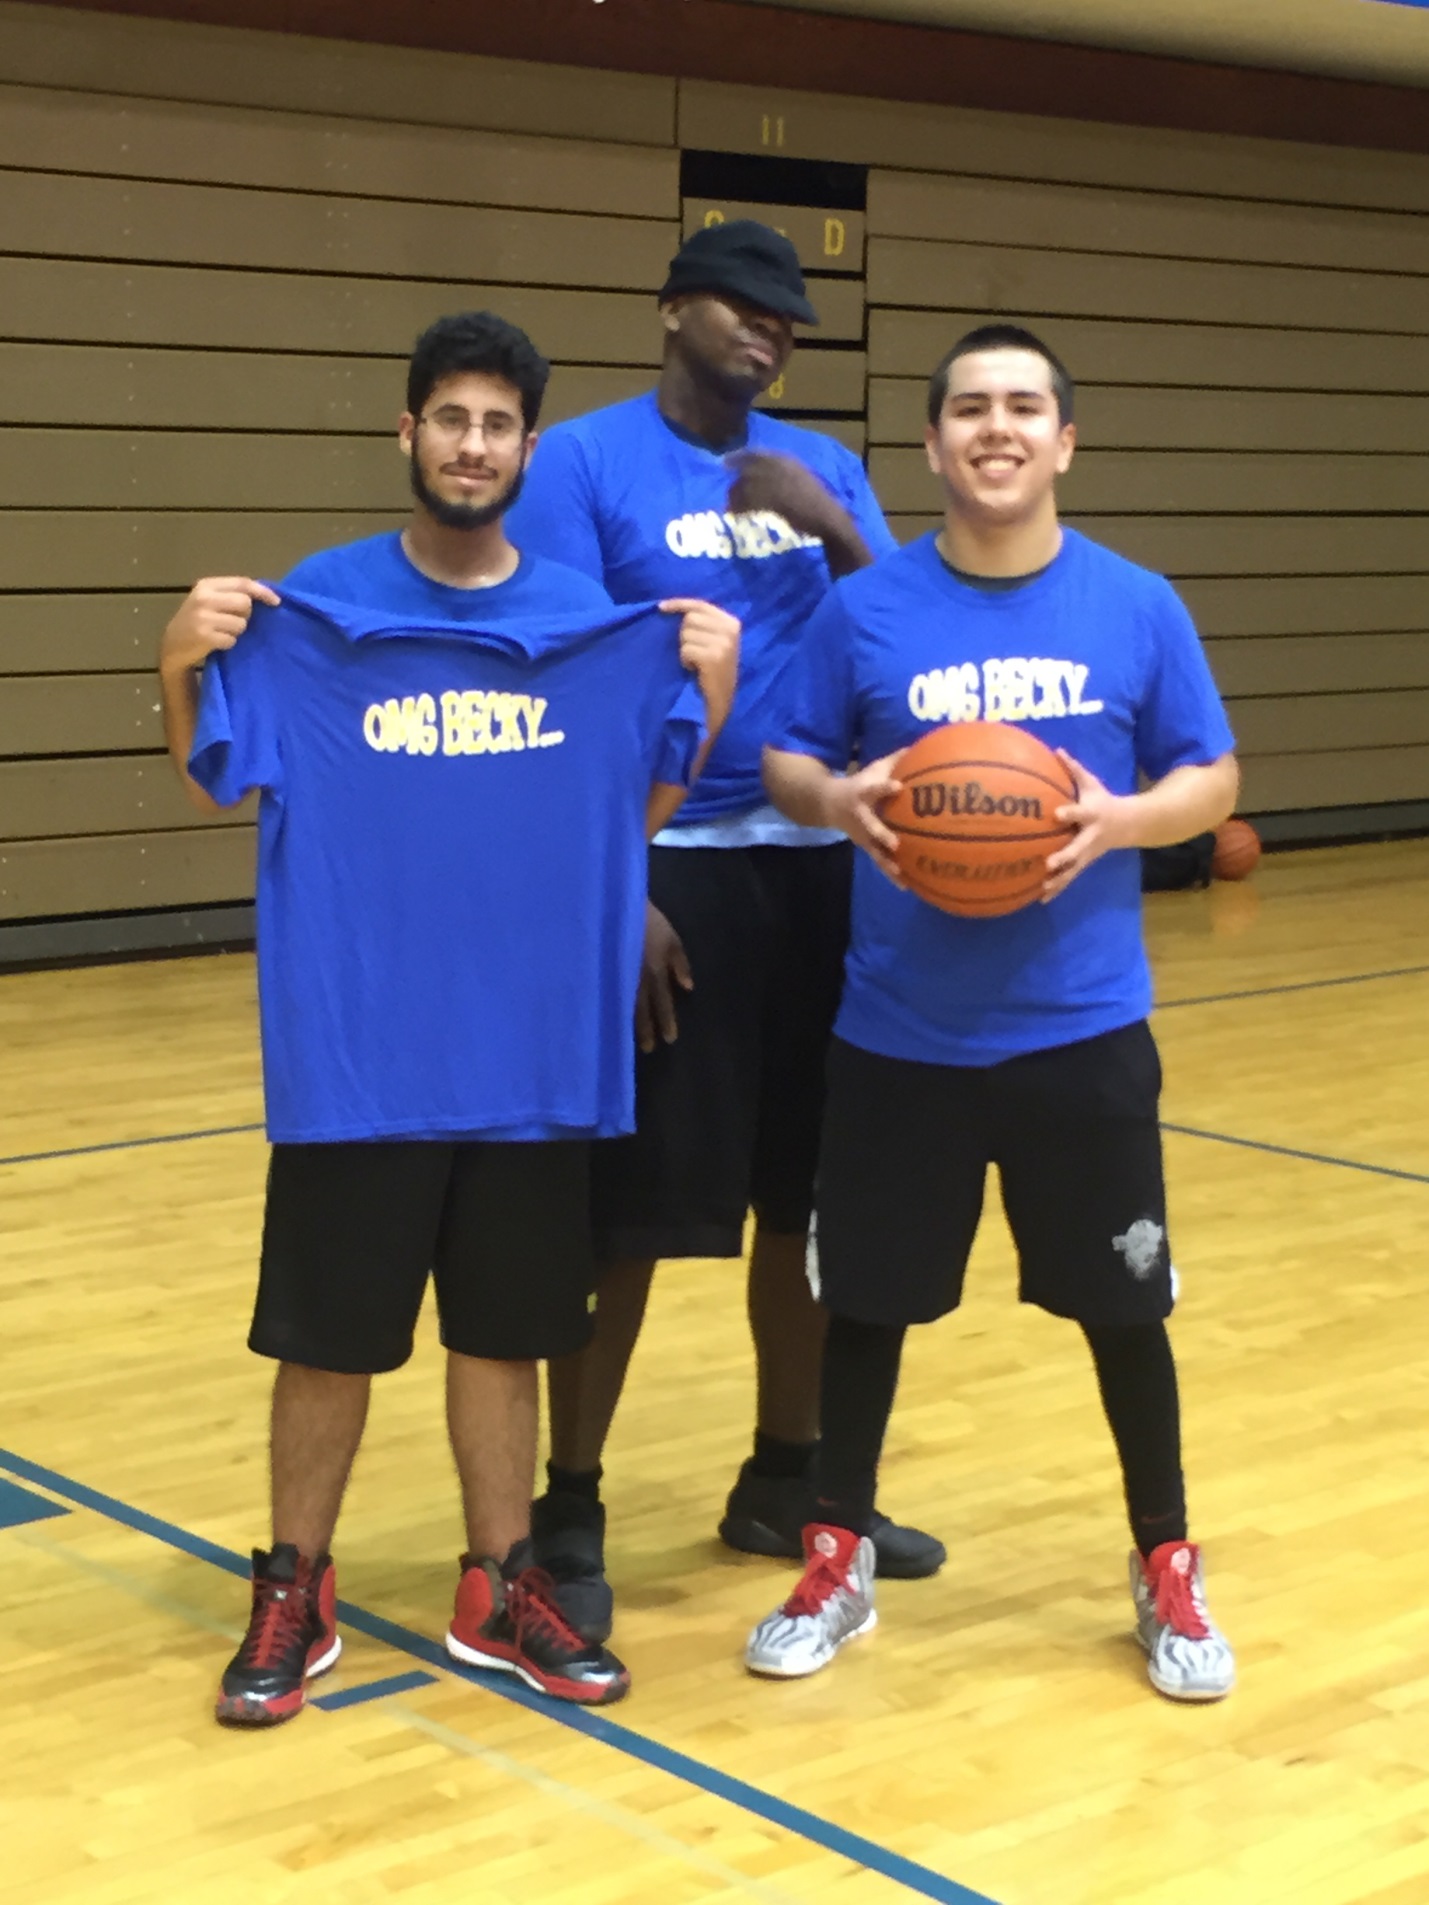 All We Do Is Win (3v3 Basketball) Fall 2015 Champions